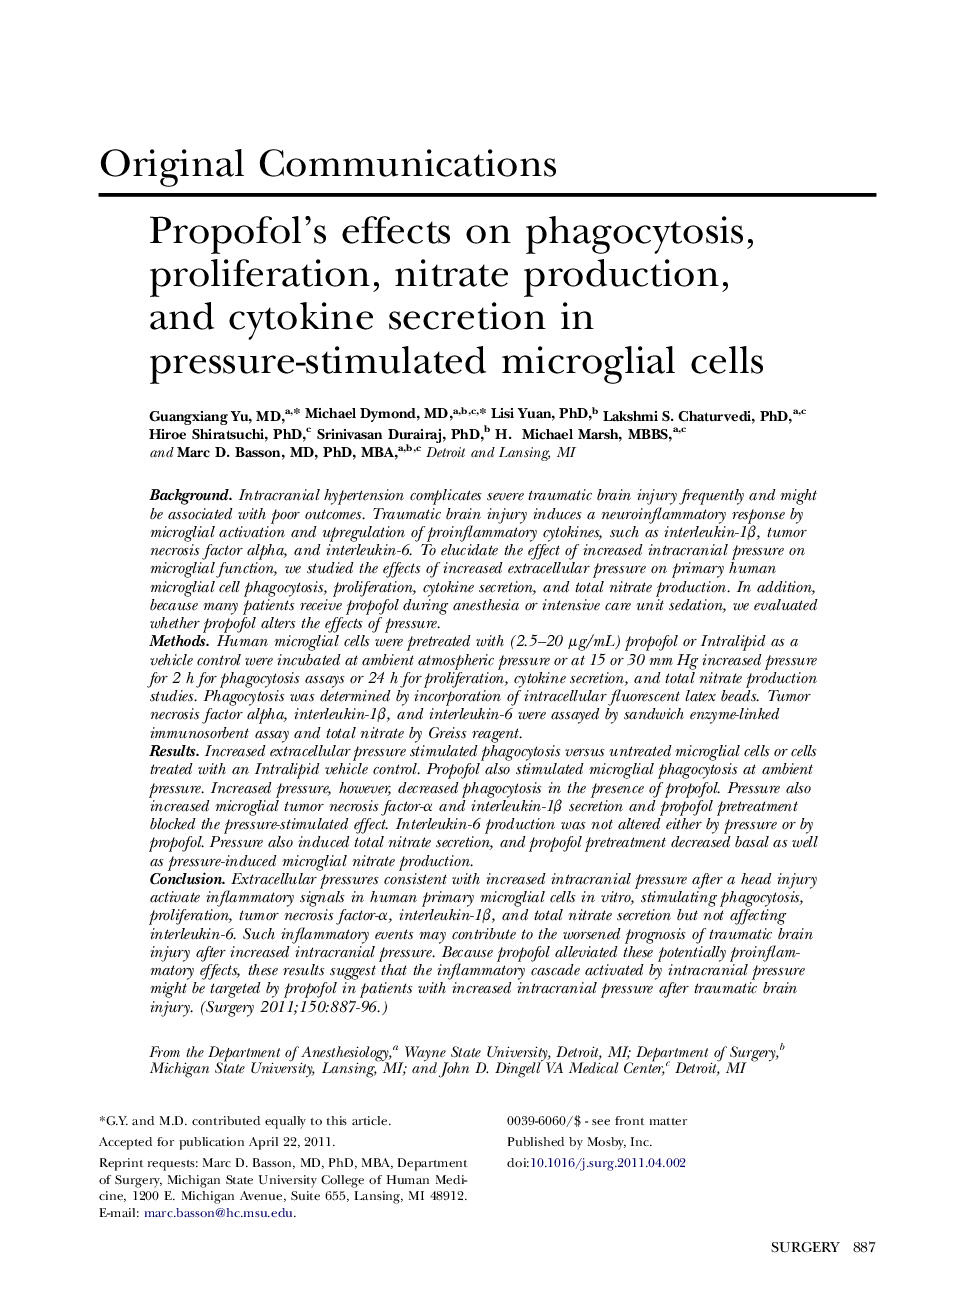 Propofol’s effects on phagocytosis, proliferation, nitrate production, and cytokine secretion in pressure-stimulated microglial cells